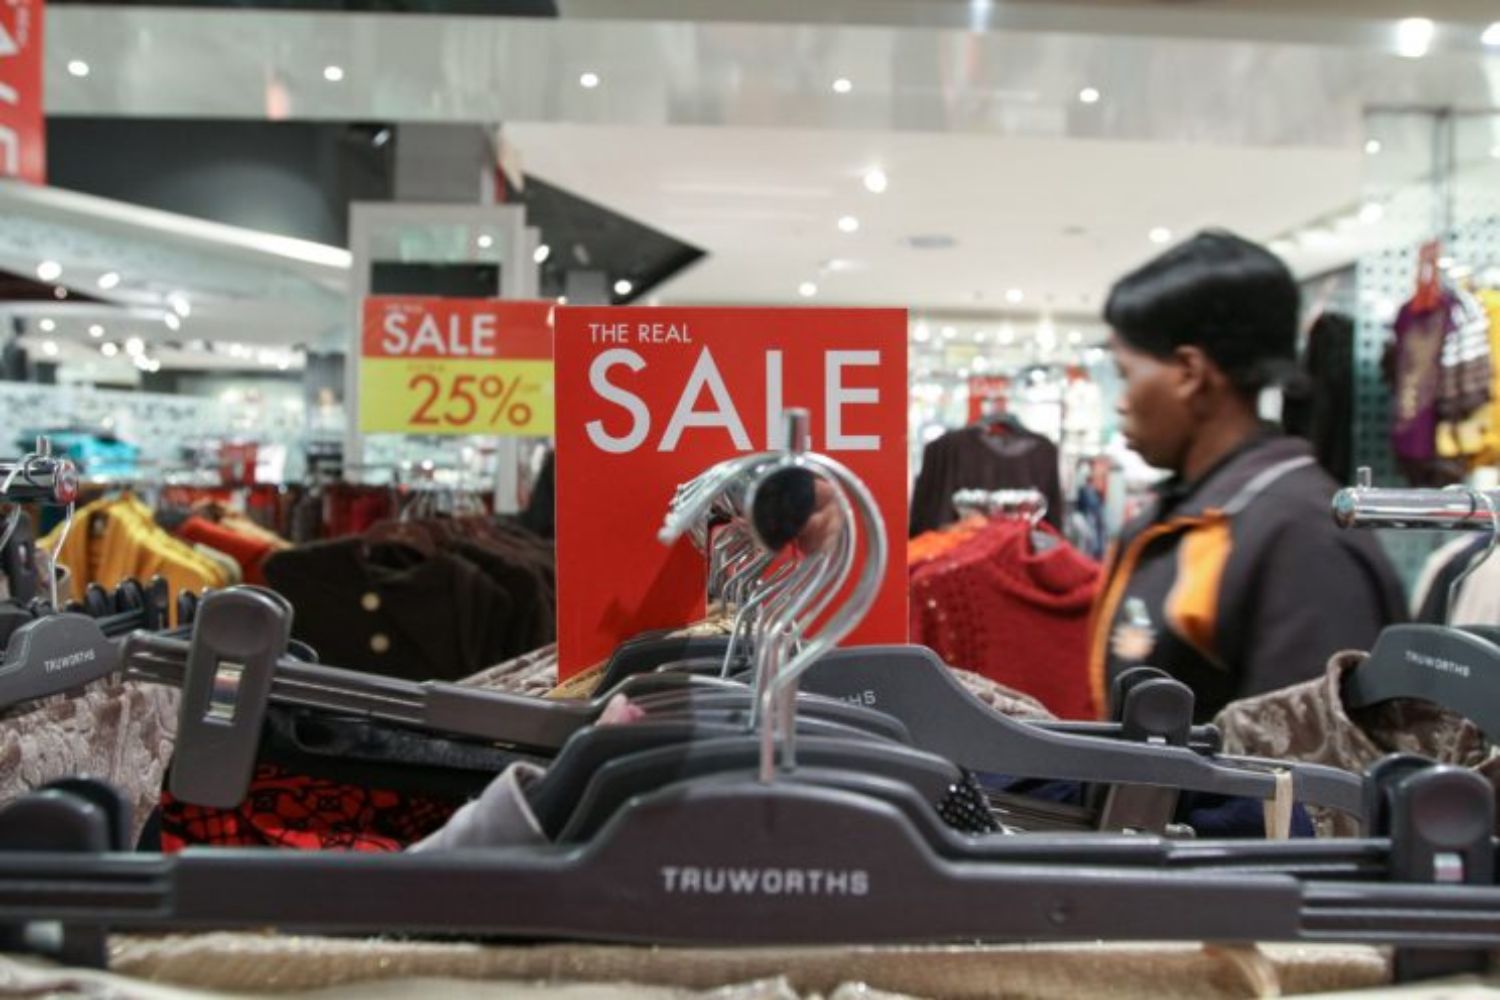 https://www.citizen.co.za/wp-content/uploads/2023/02/Truworths-continues-to-bolter.jpg